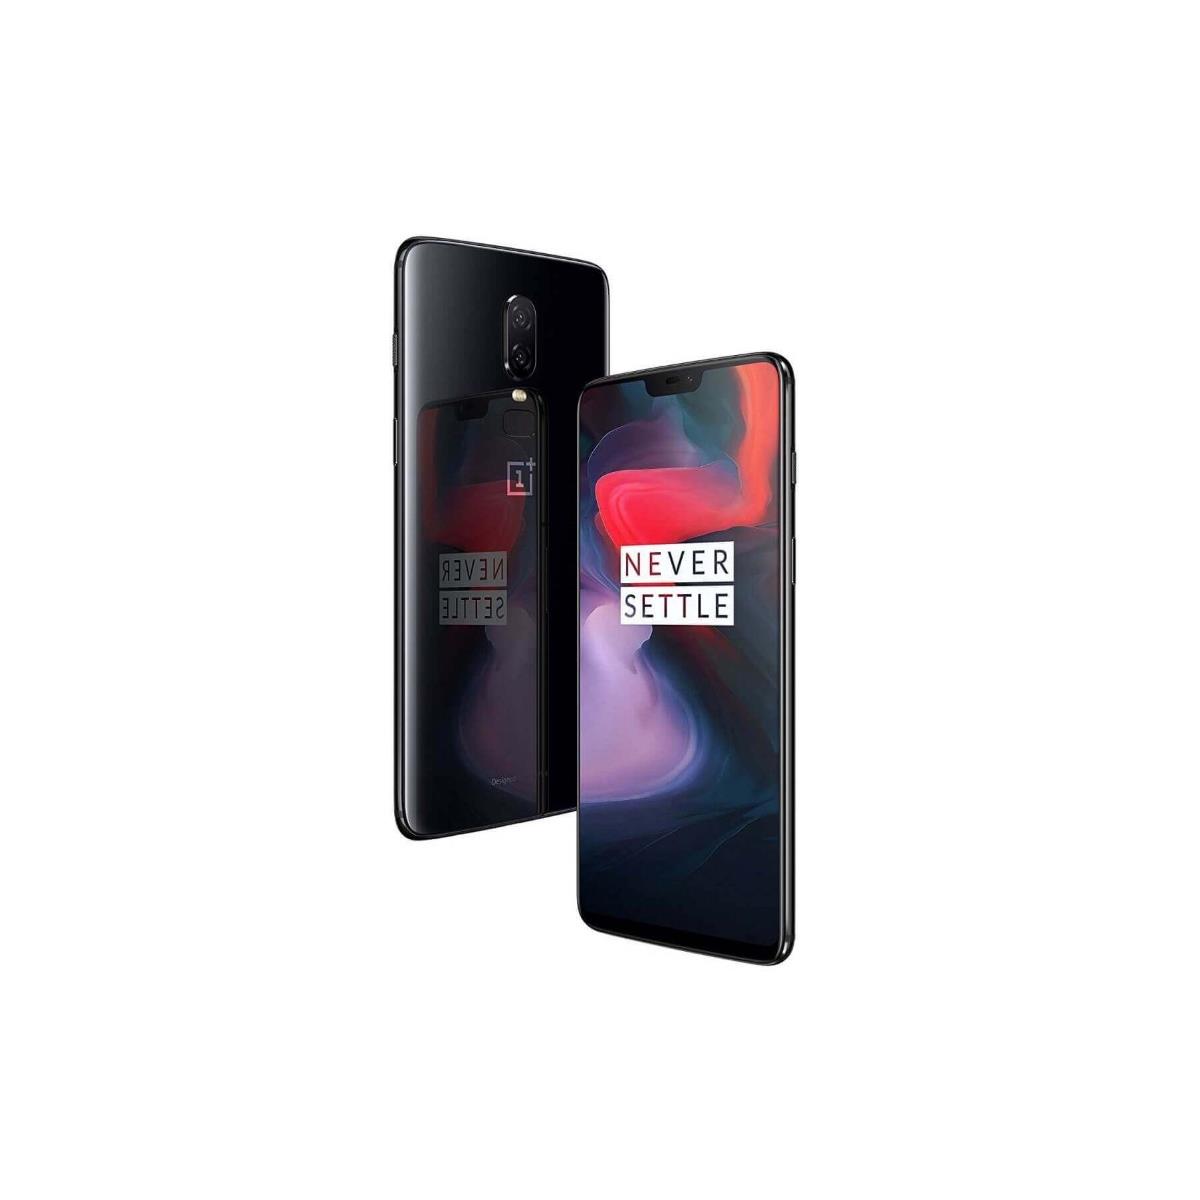 OnePlus 6 Flagship Android Phone With Mirror Black Finish Leaks On